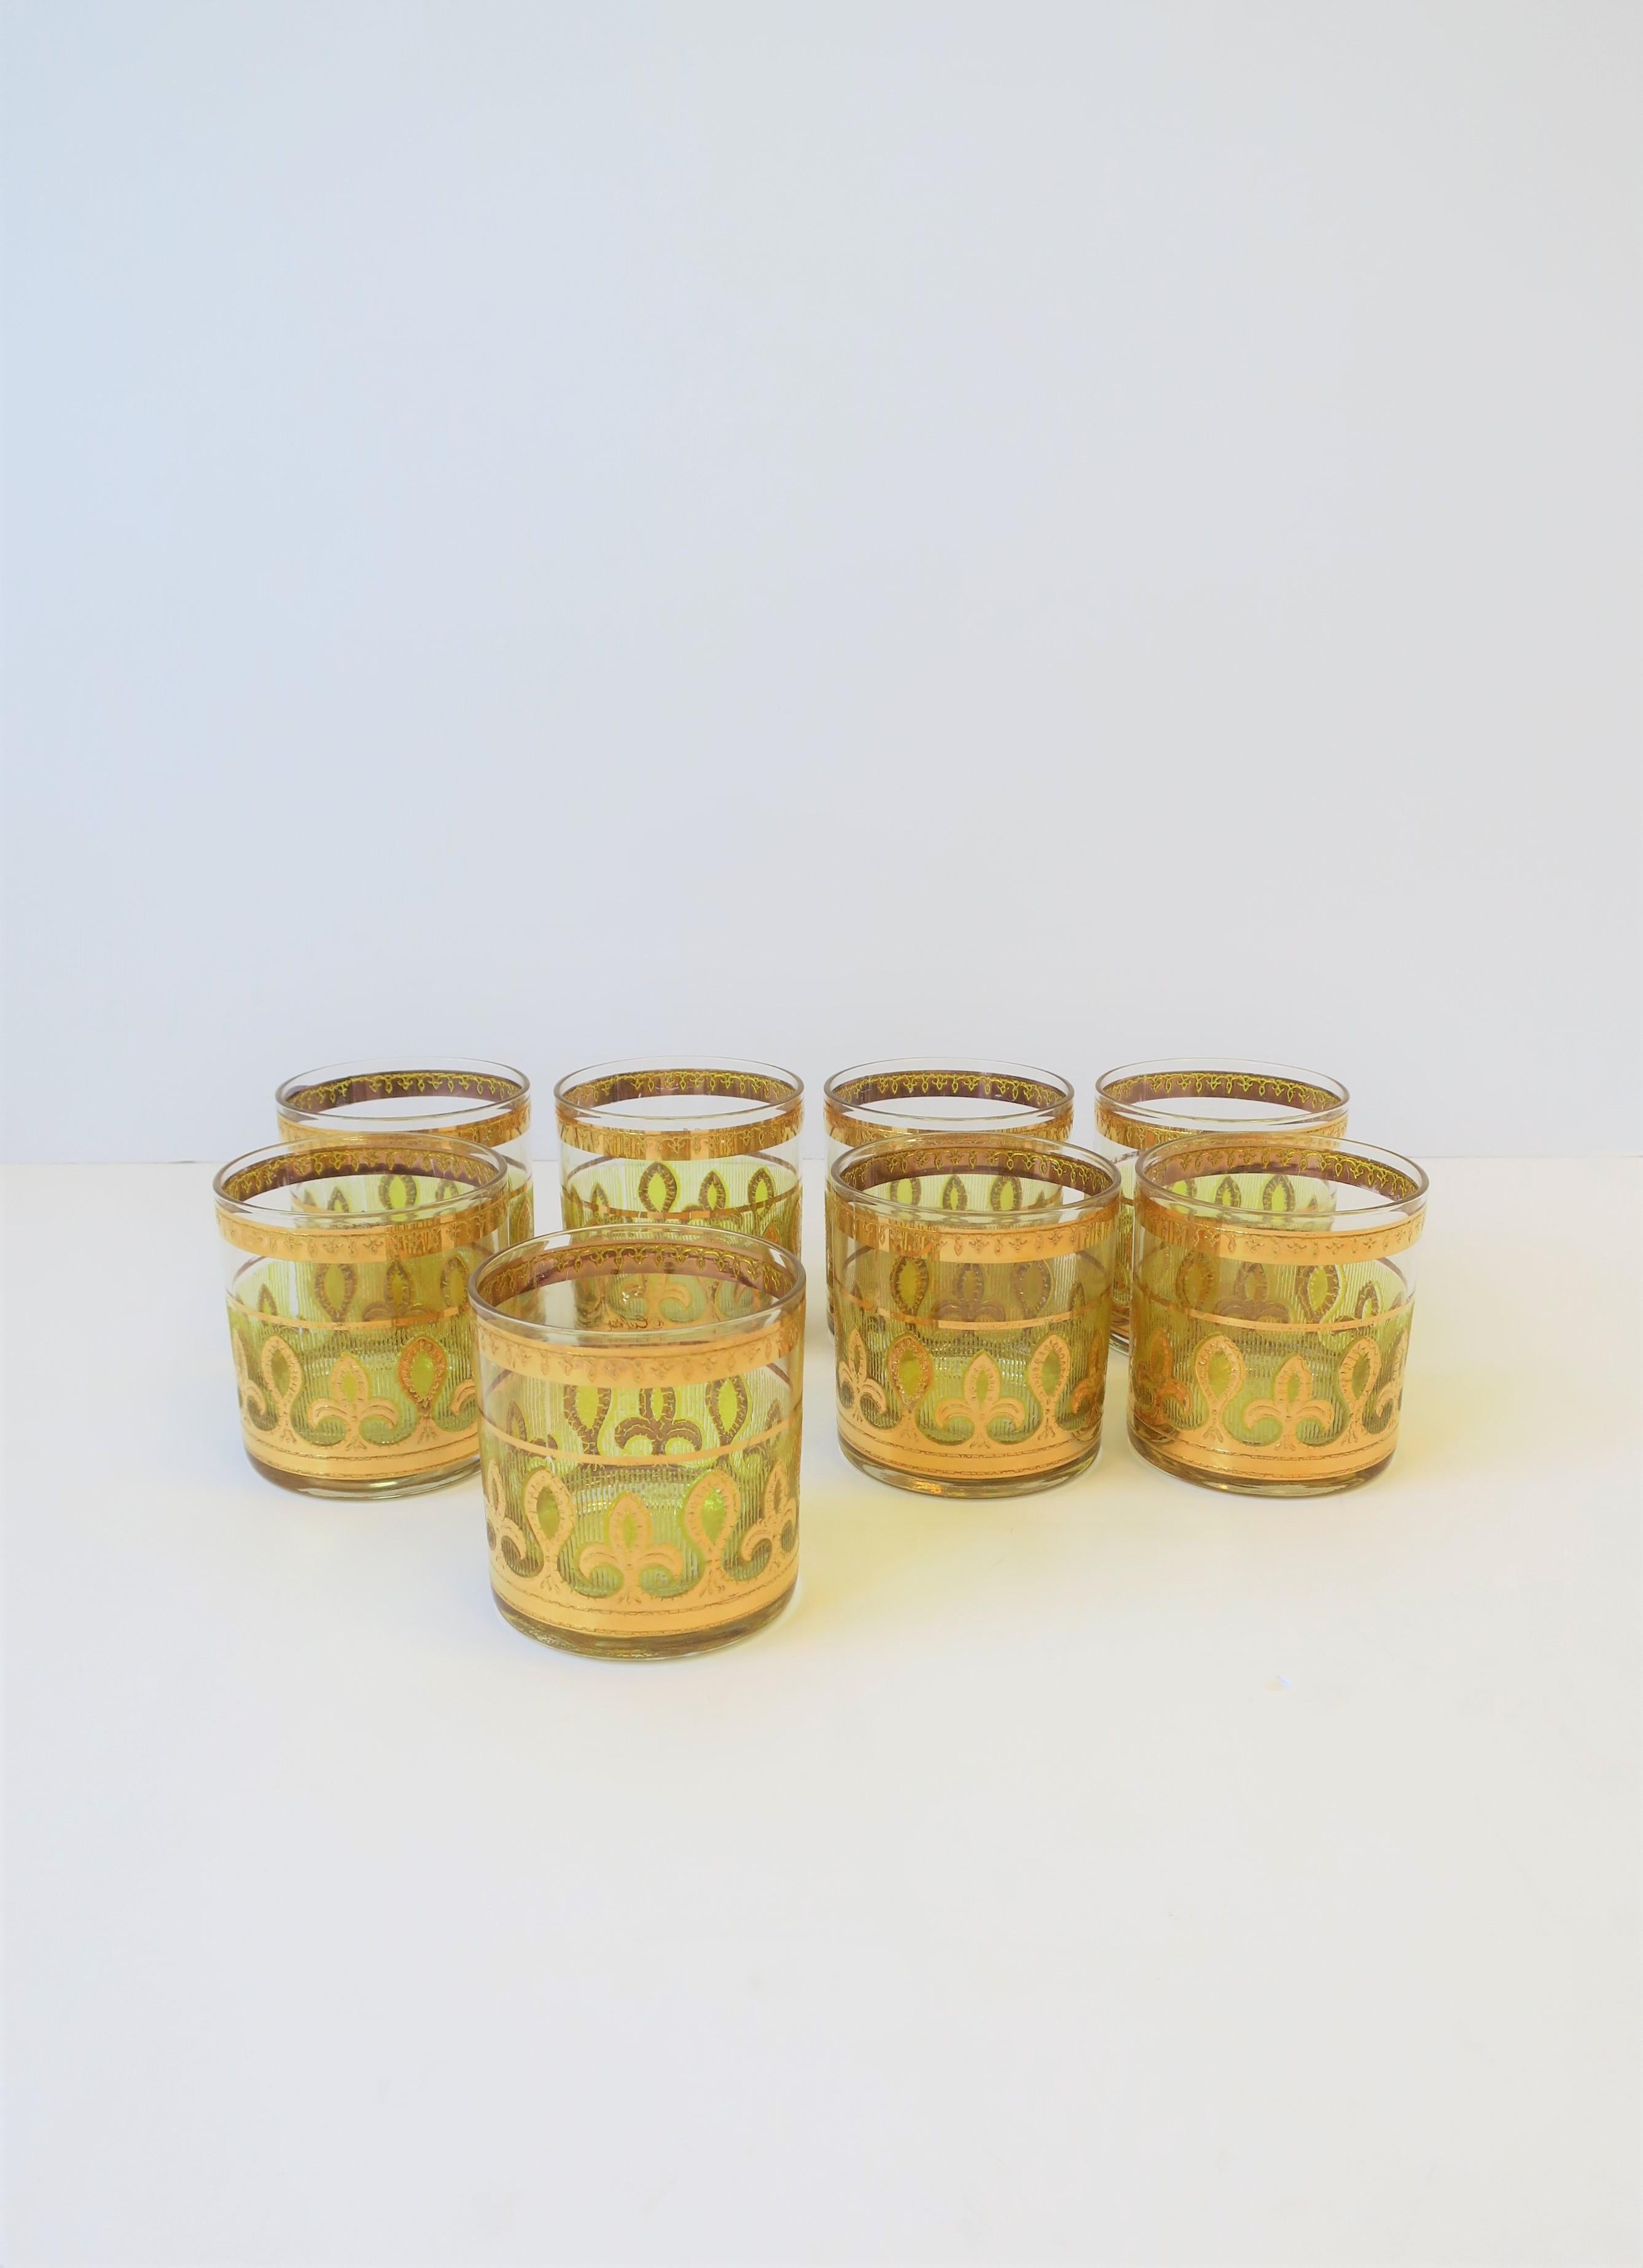 Polychromed '60s Designer Set of Yellow and Gold Rocks' Cocktail Glasses